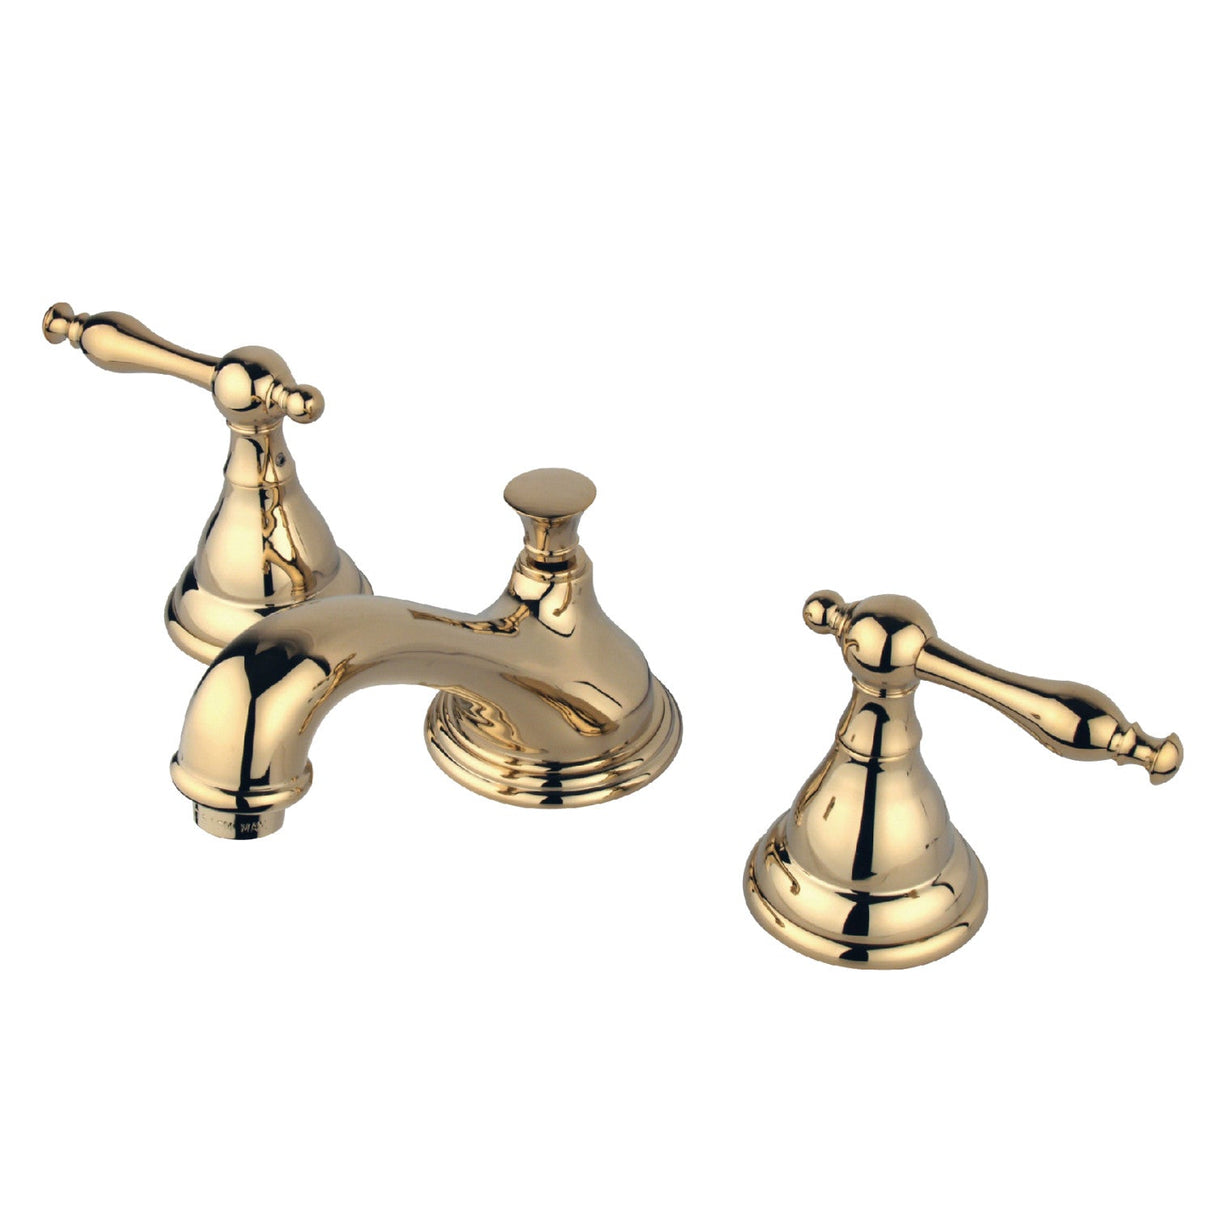 KS5562NL Two-Handle 3-Hole Deck Mount Widespread Bathroom Faucet with Brass Pop-Up, Polished Brass